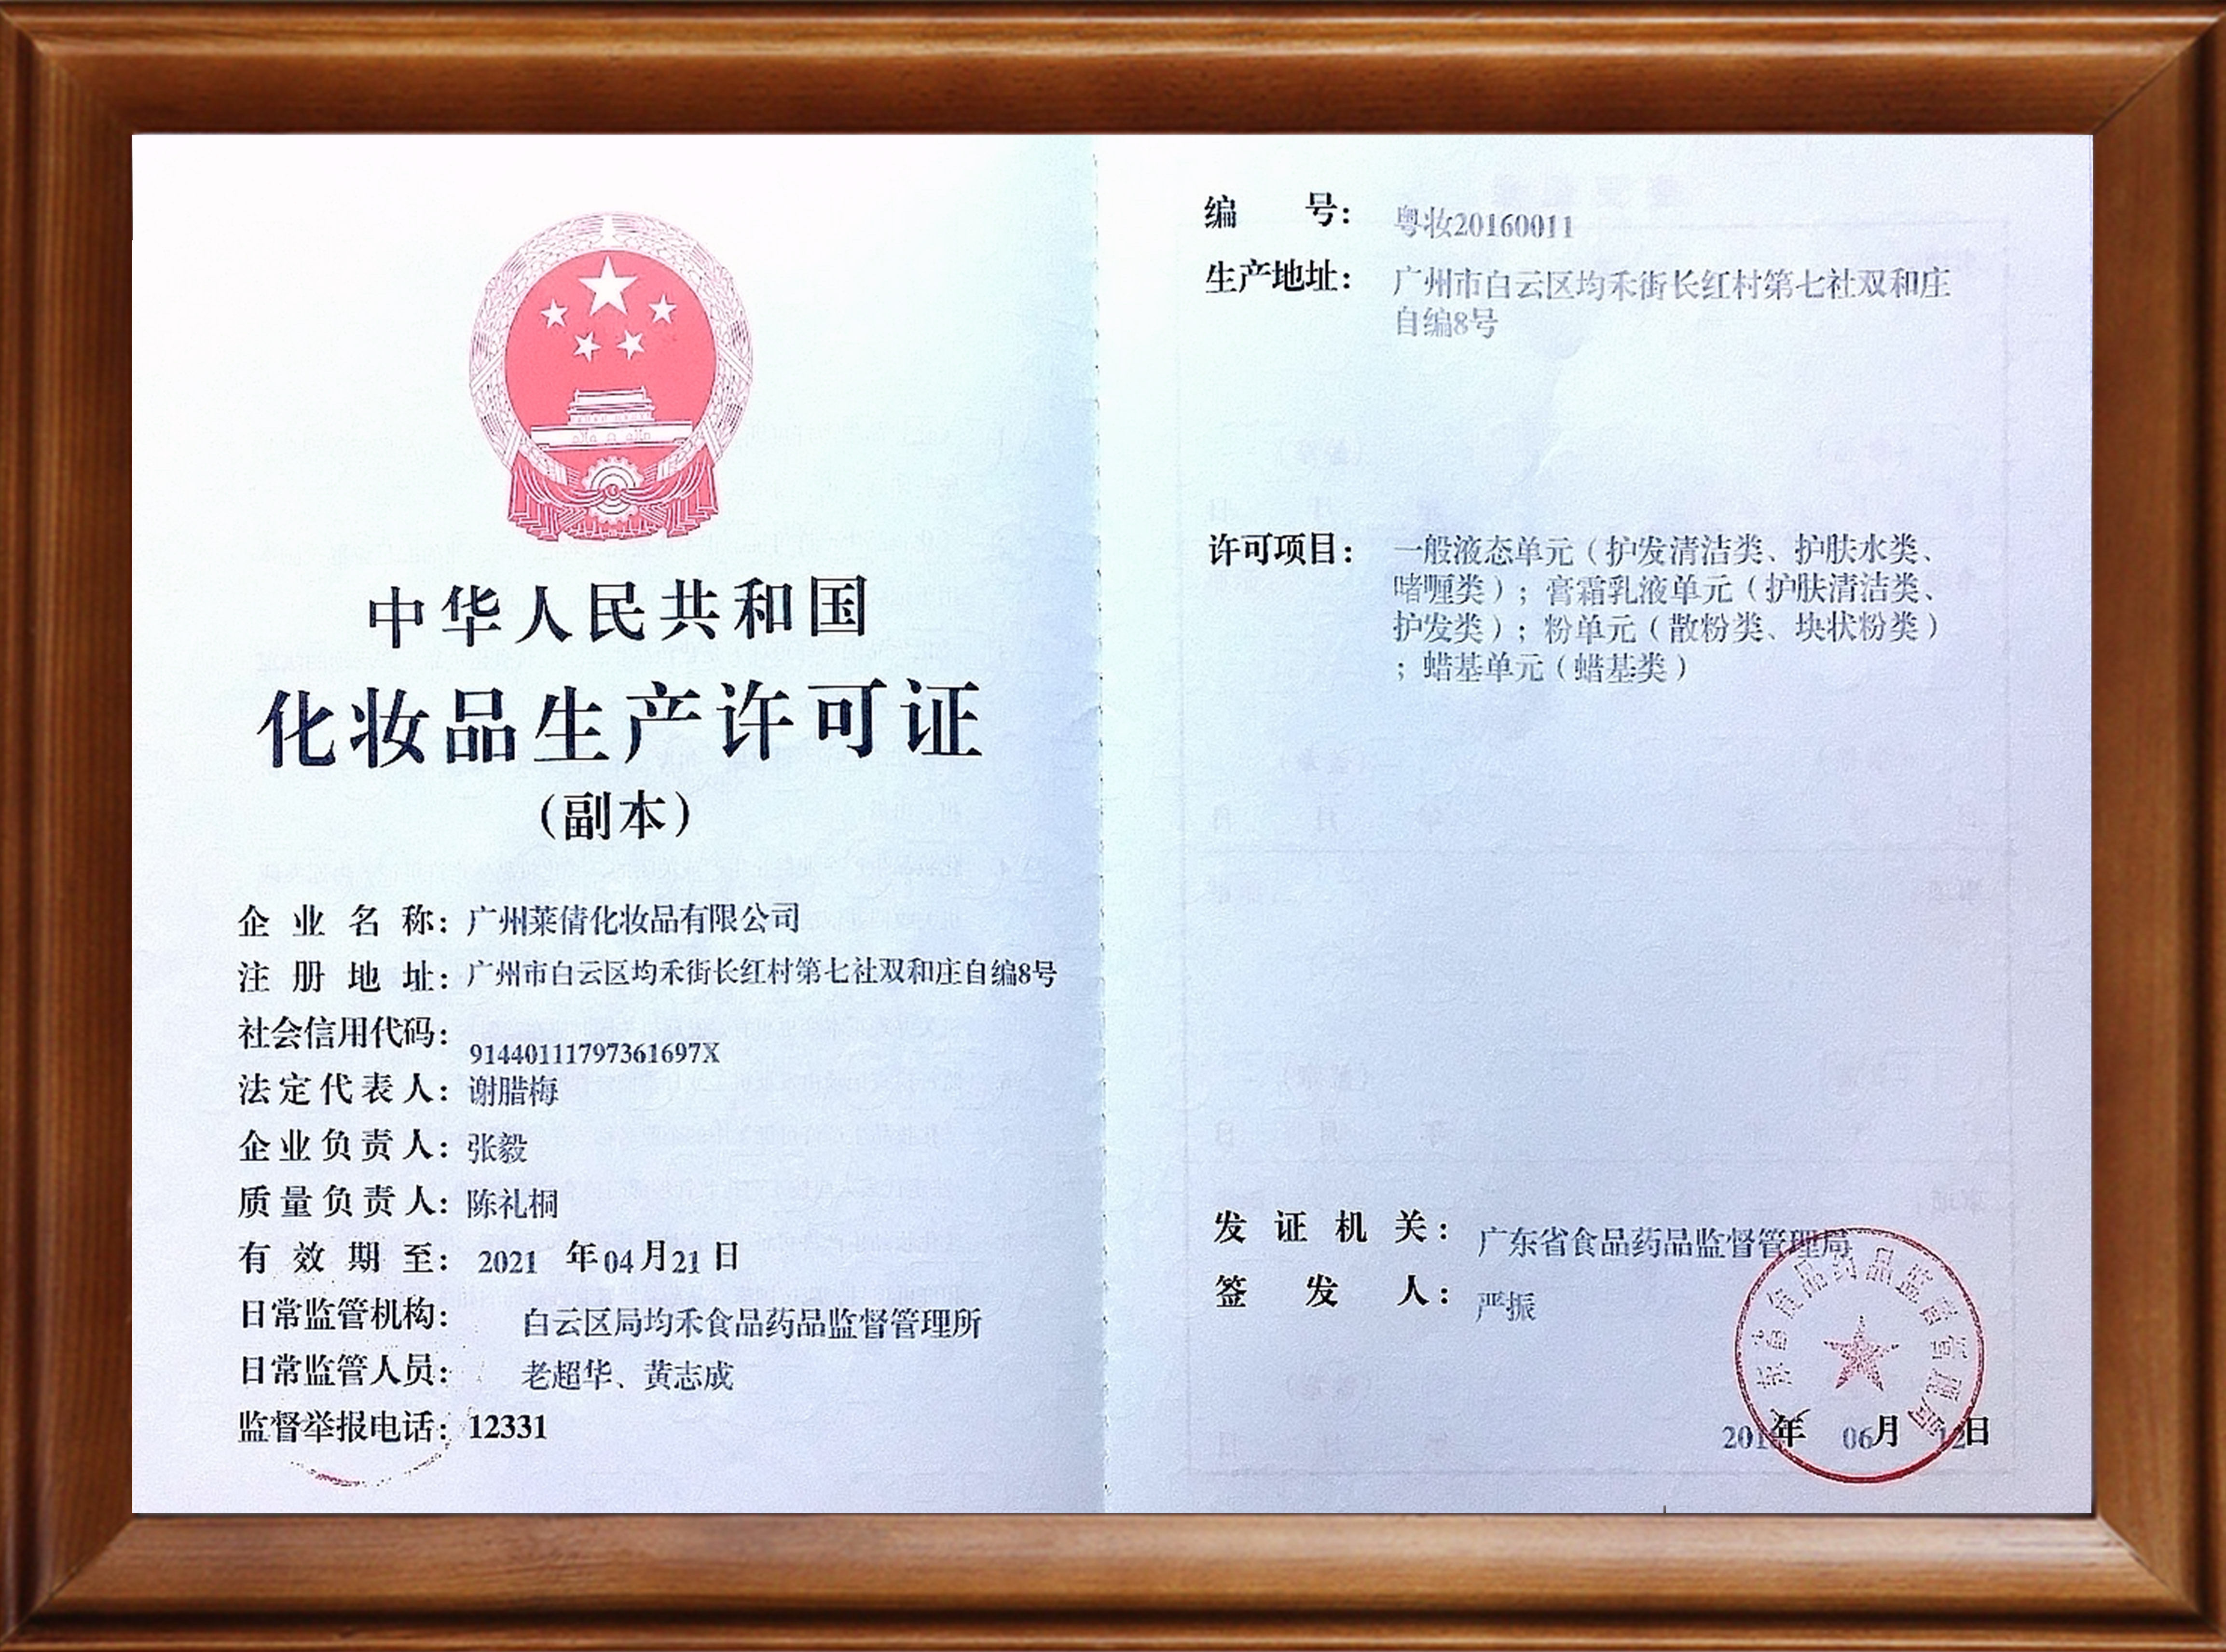 Production license of GuangZhou Natural Cosmetics CO.,LTD